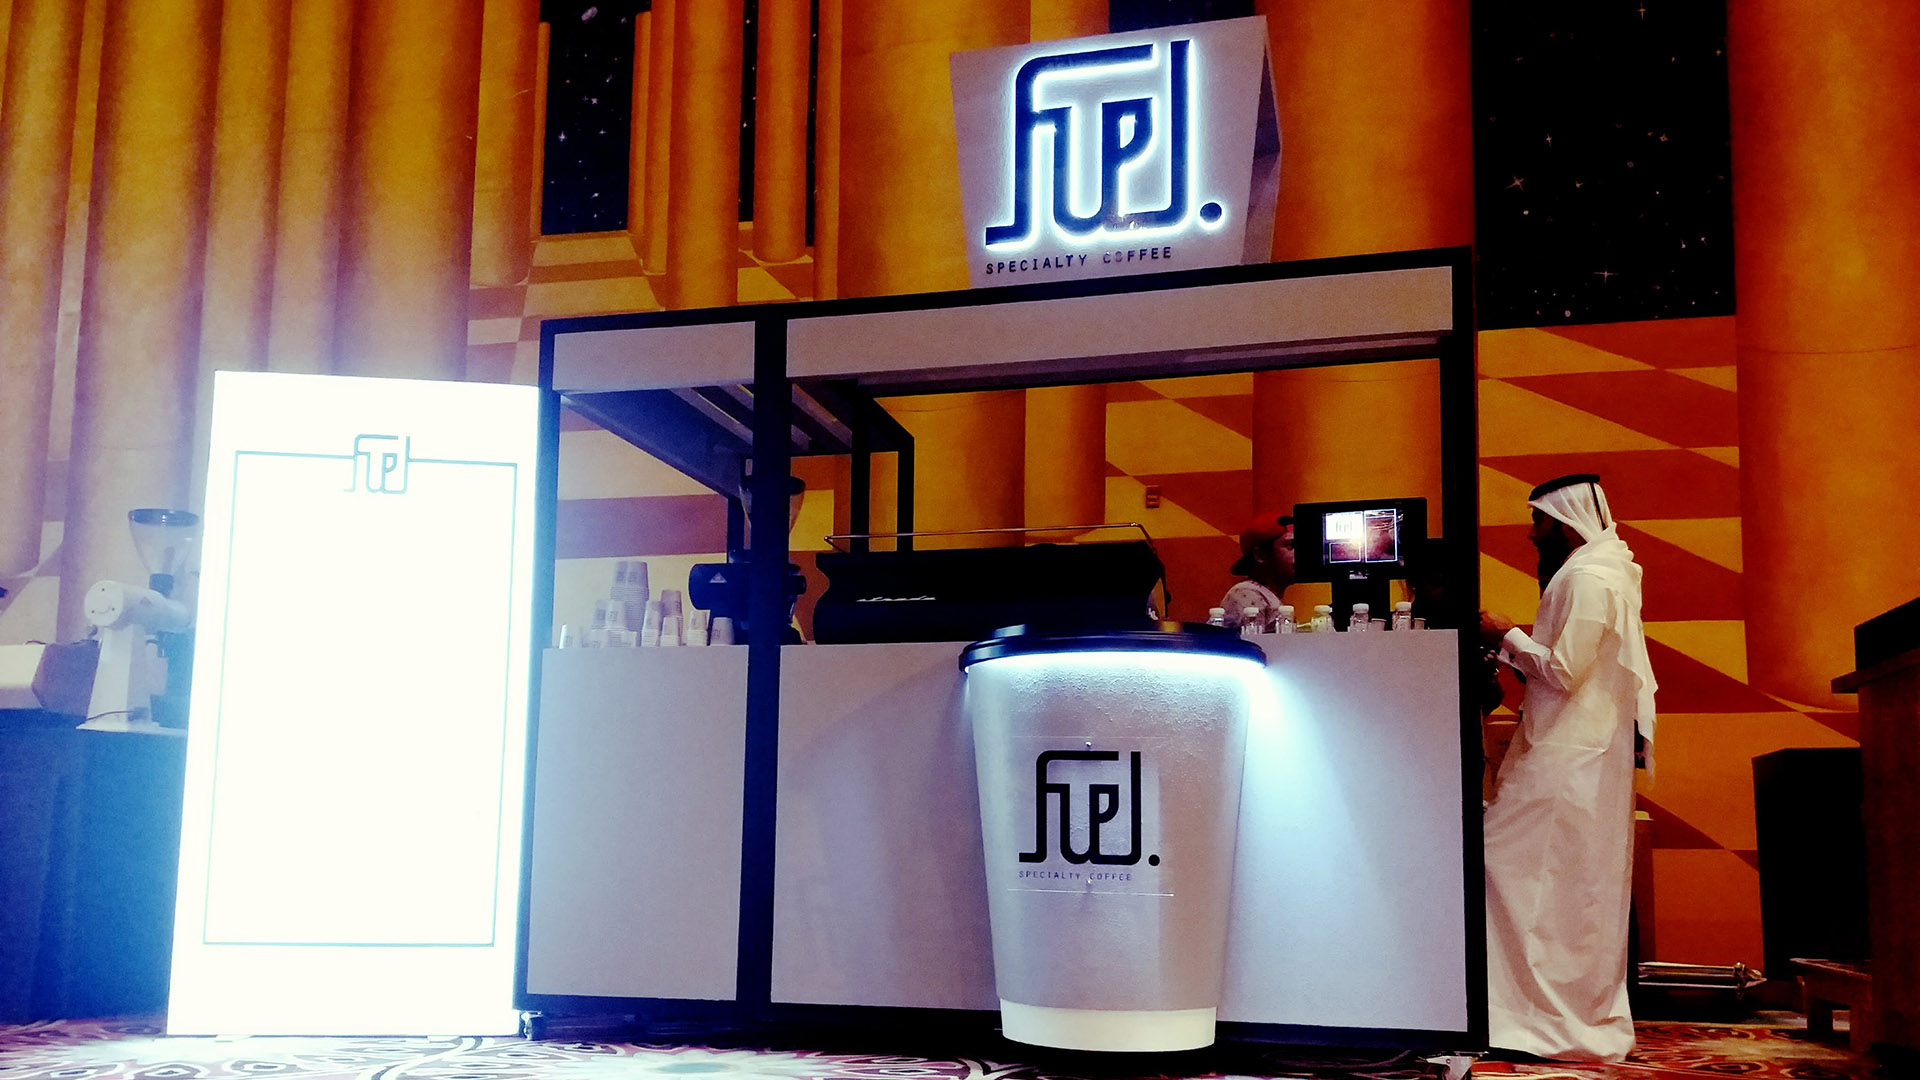 A custom Coffee Kiosk for Fuel Coffee designed, fabricated and installed by ME Visual, Qatar